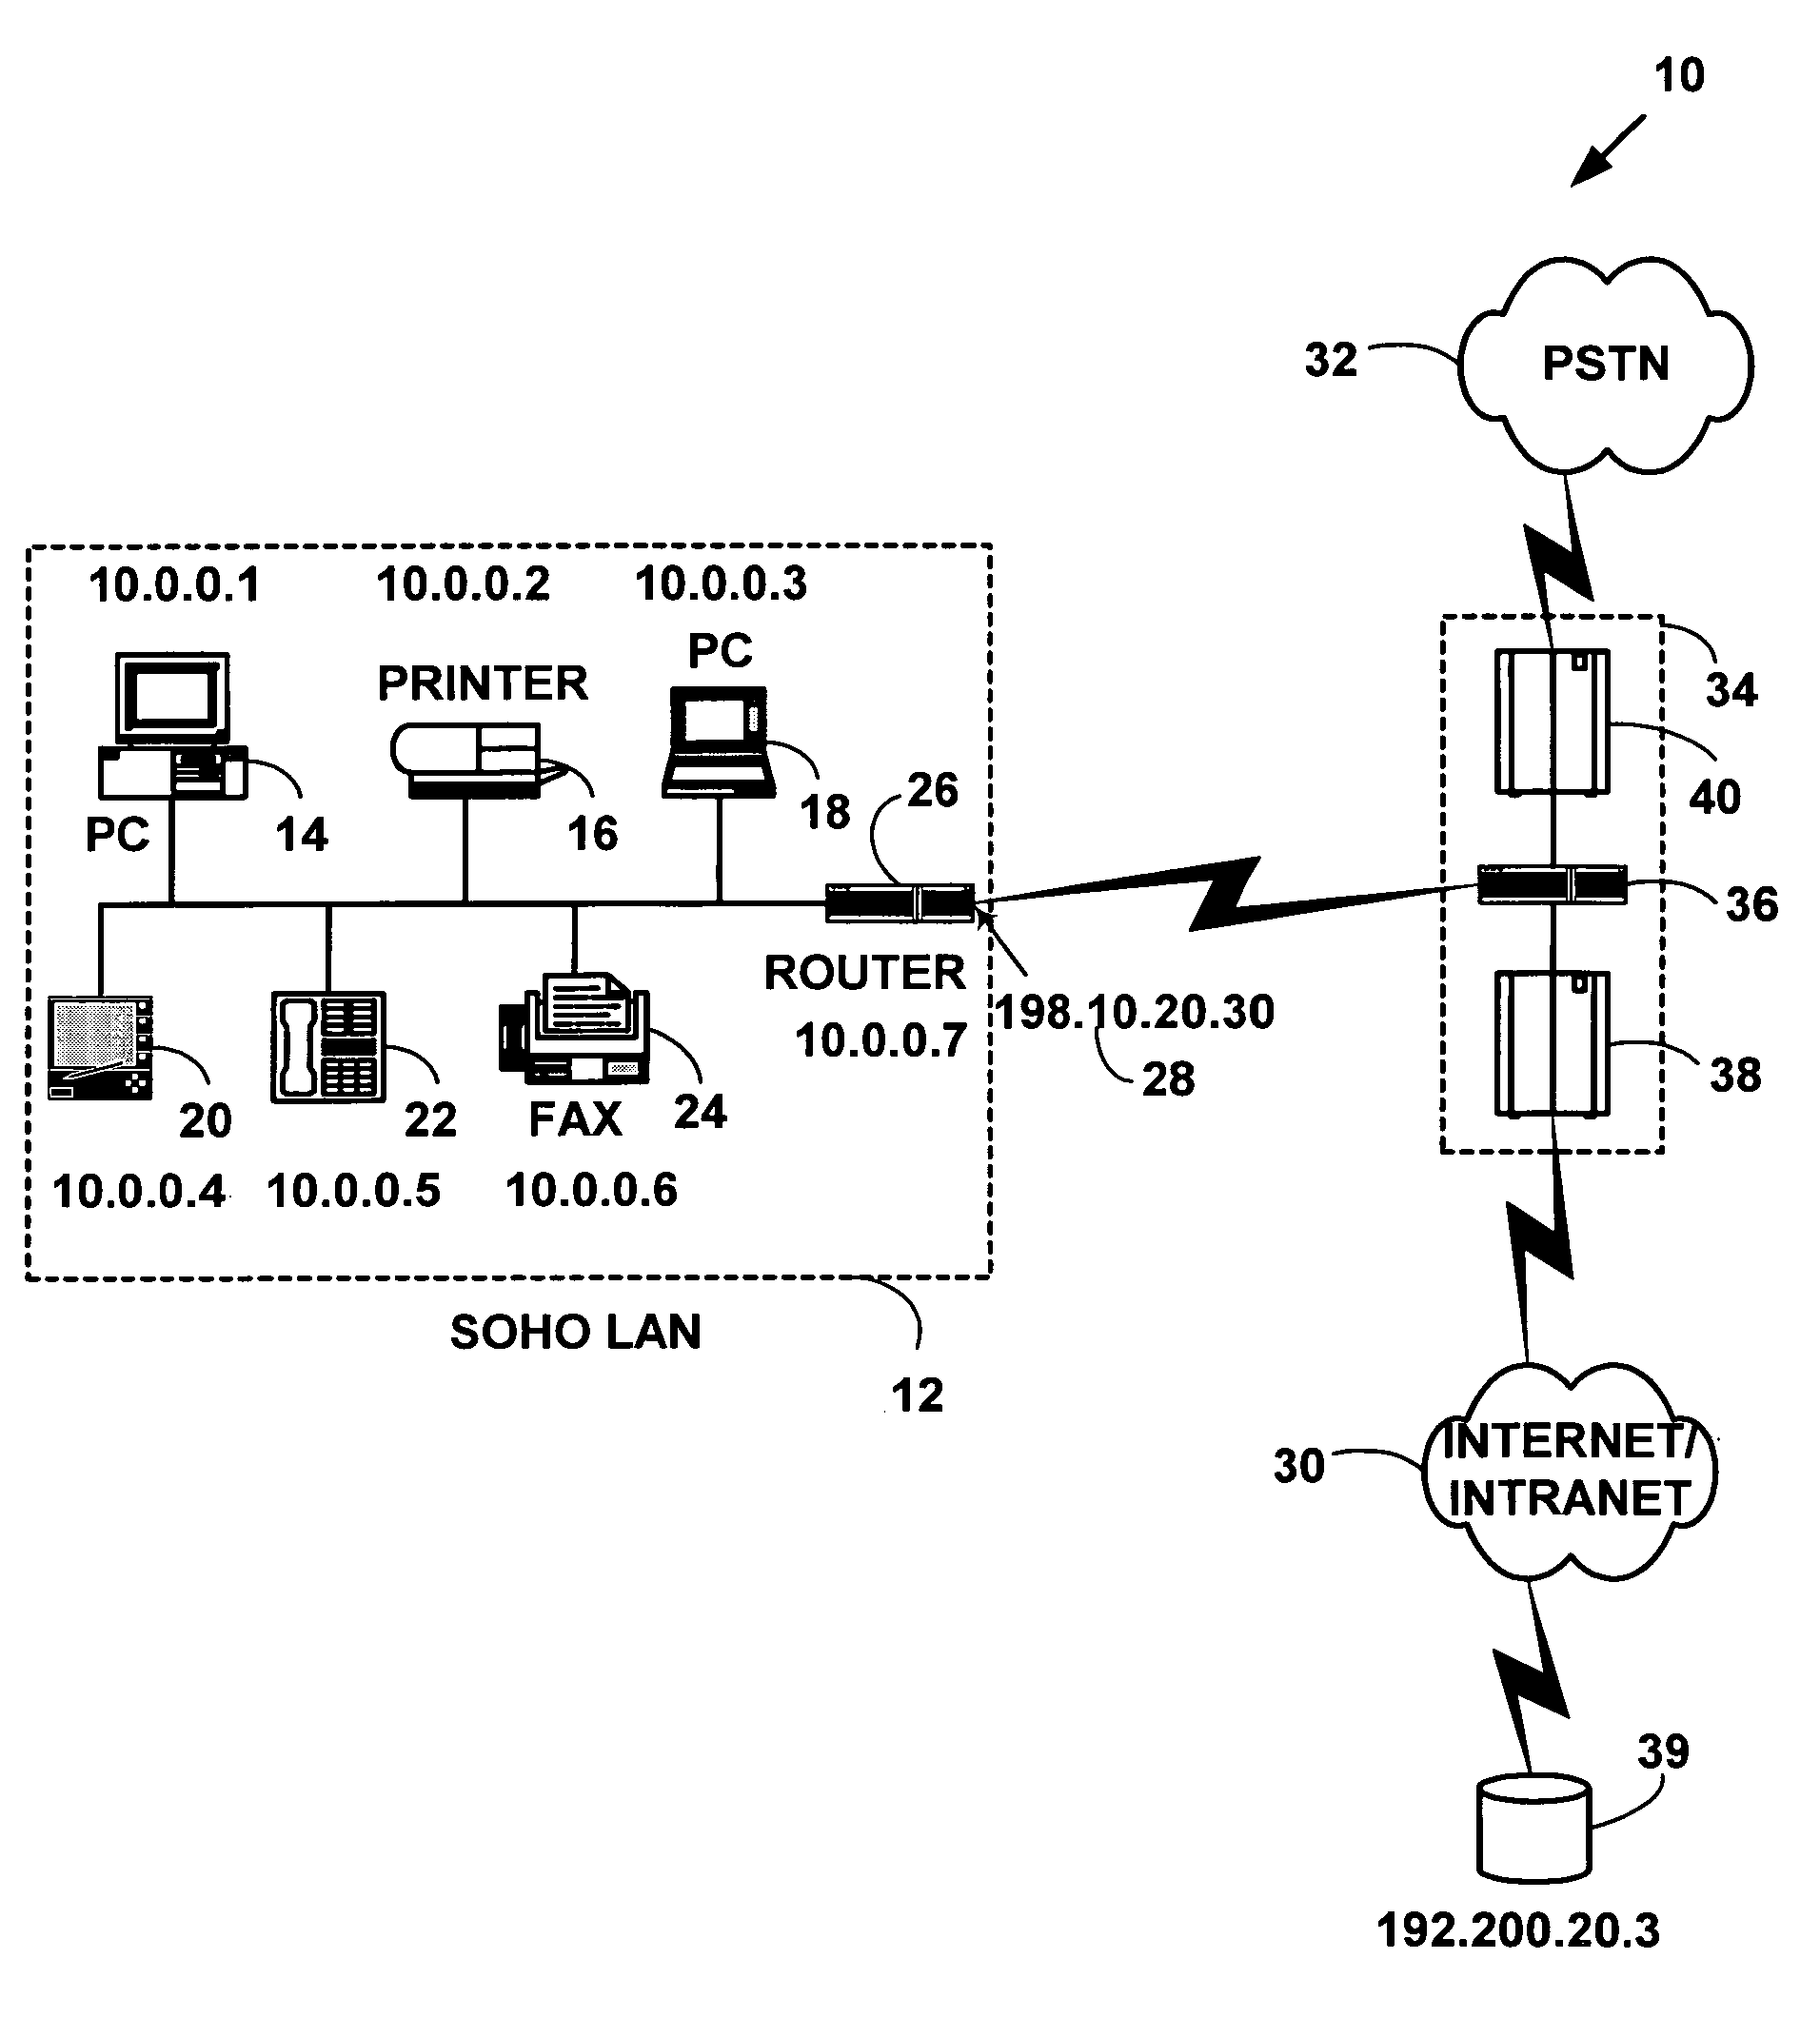 Method and system for distributed network address translation with network security features